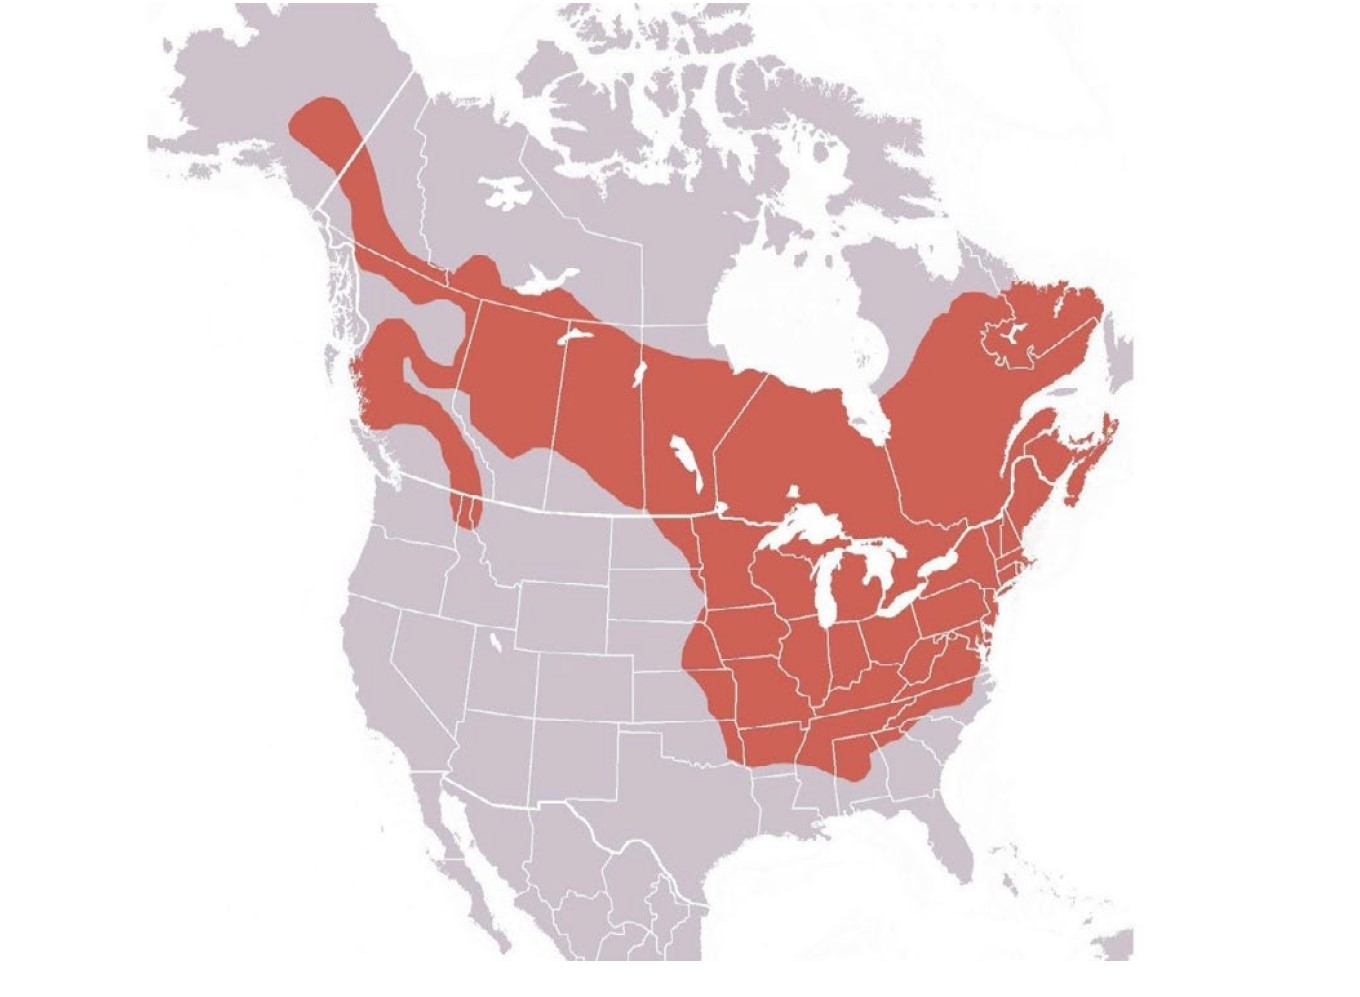 A map of most of North America shaded to indicate where the woodchuck is found.